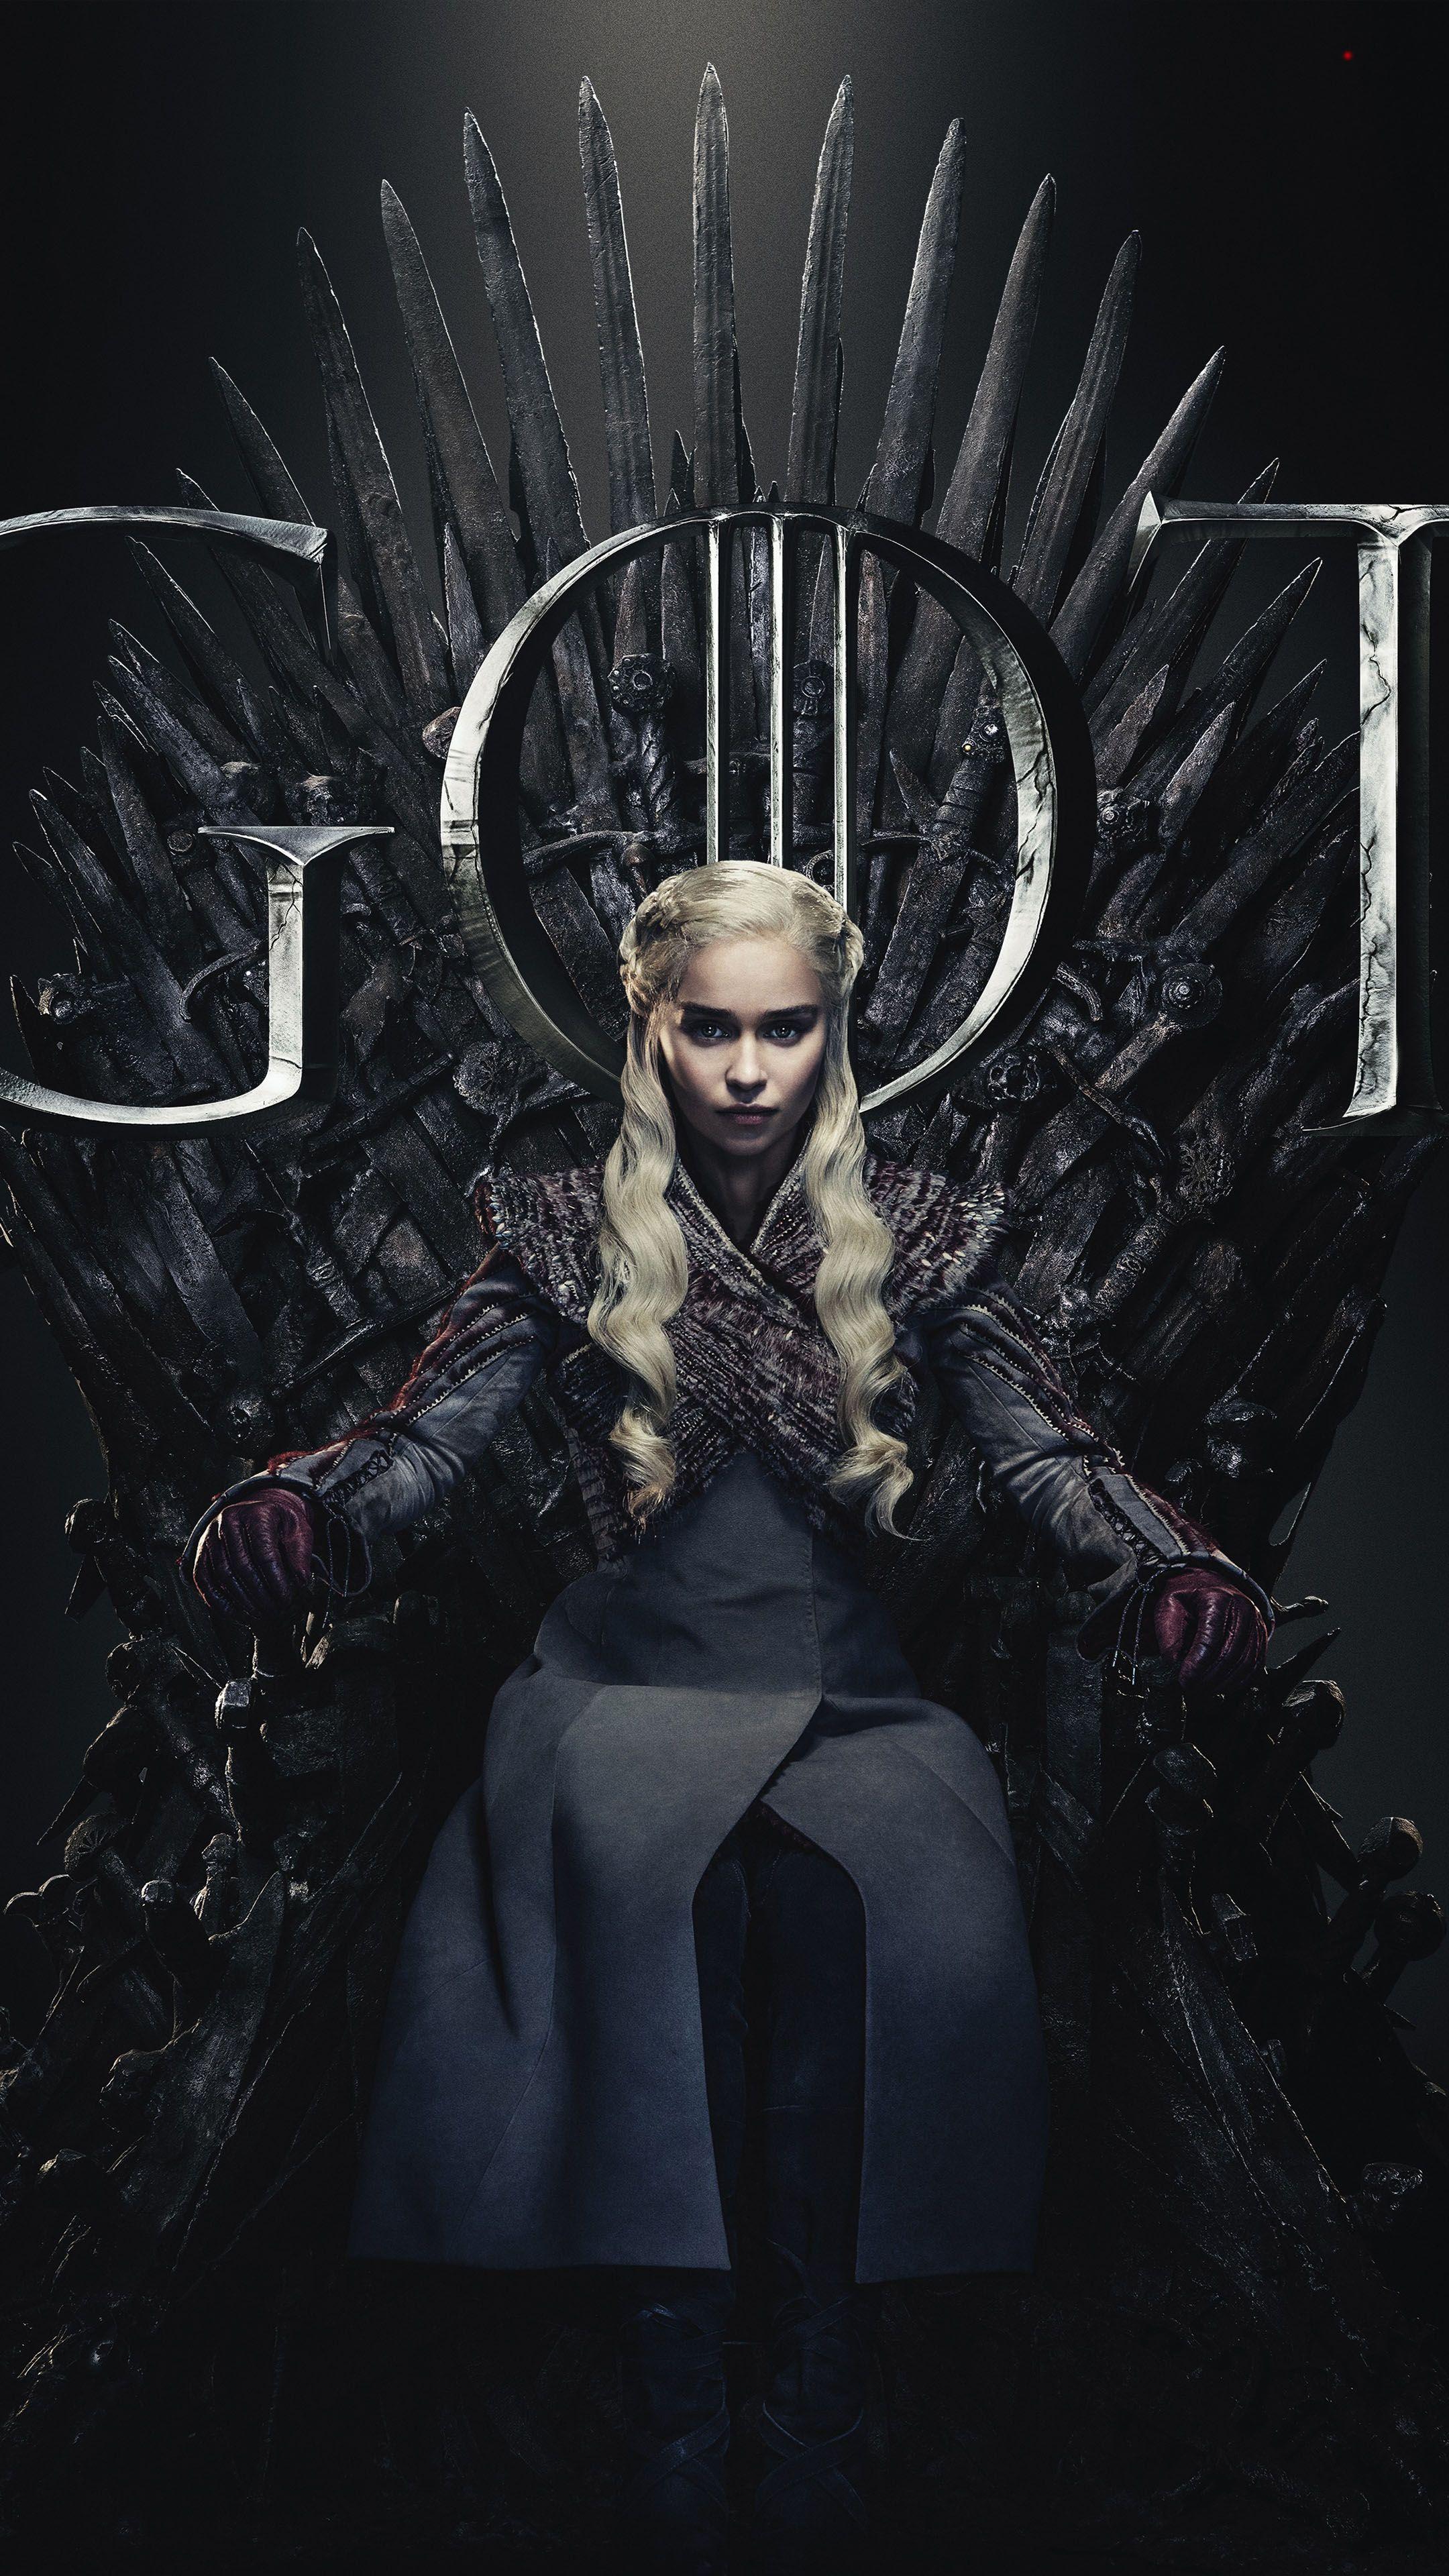 Wallpaper ID 351991  TV Show Game Of Thrones Phone Wallpaper Dragon  1080x2460 free download